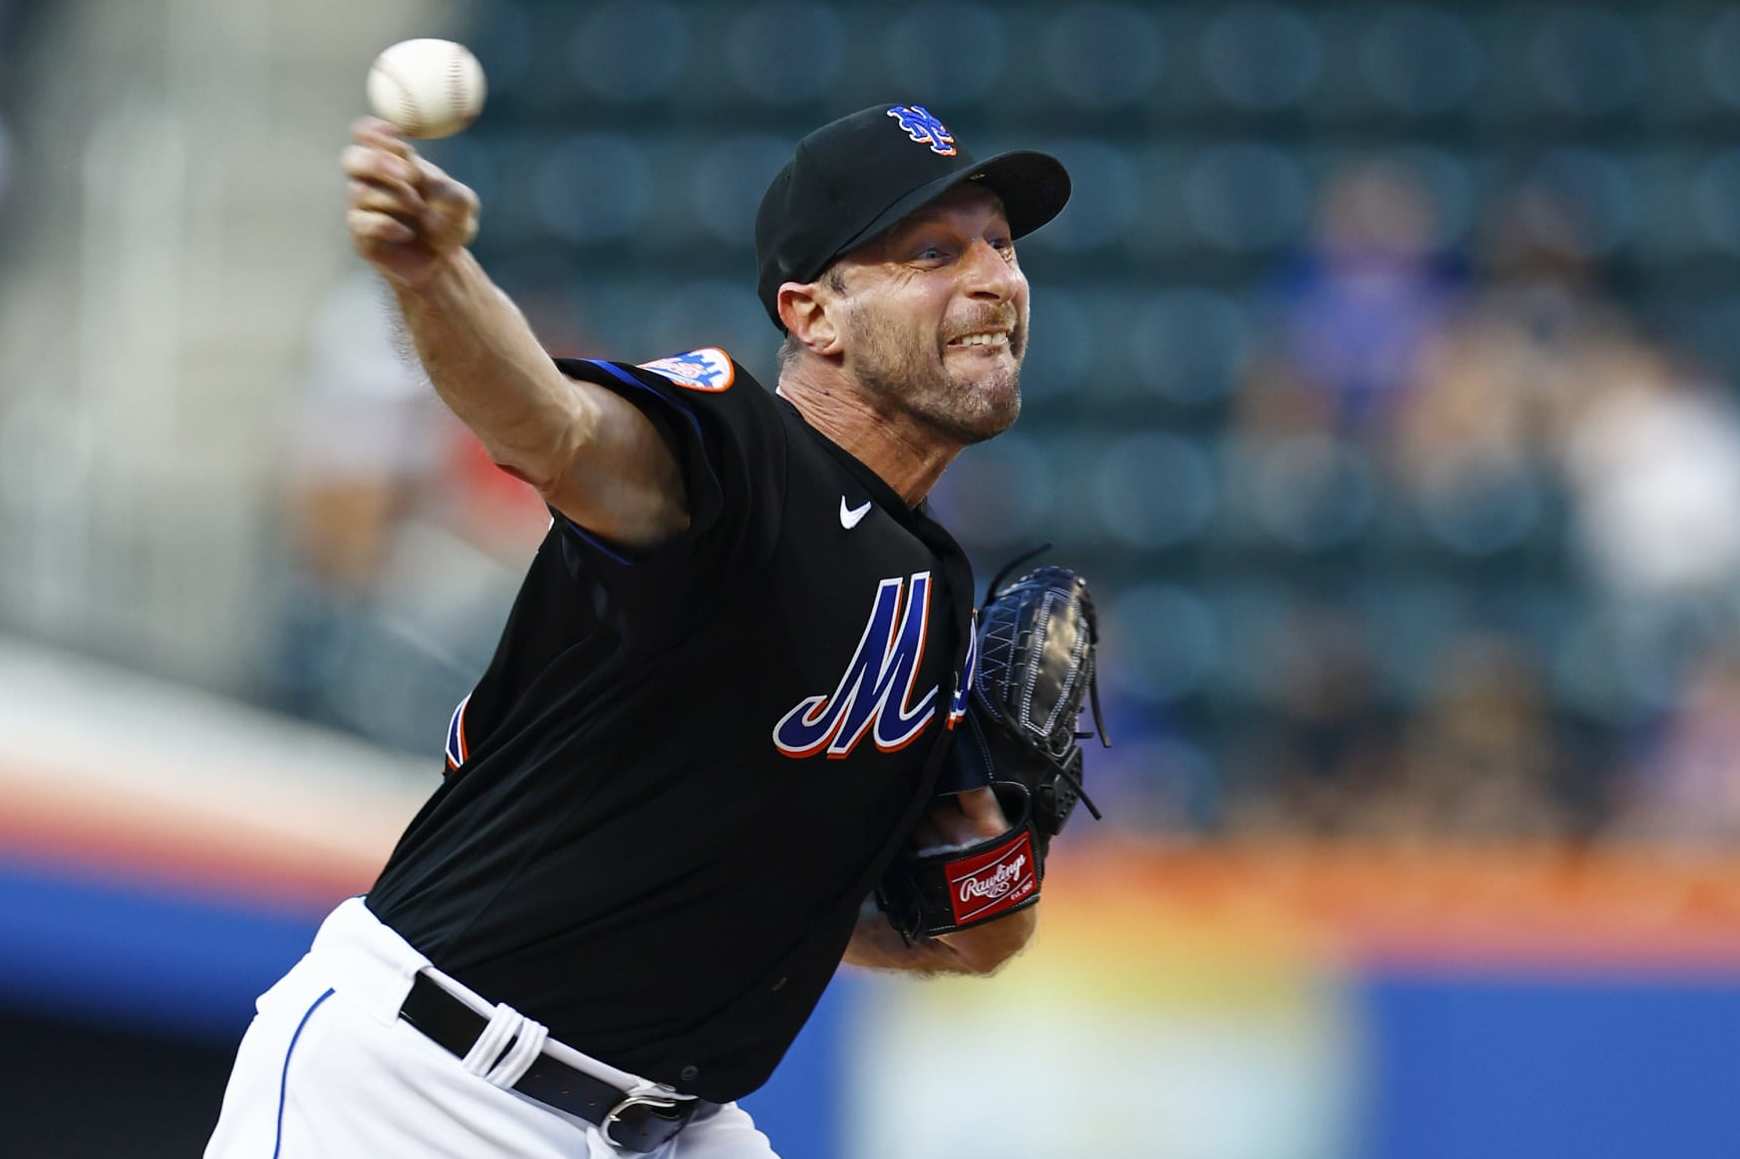 Rangers In Serious Talks With Mets About Max Scherzer Trade